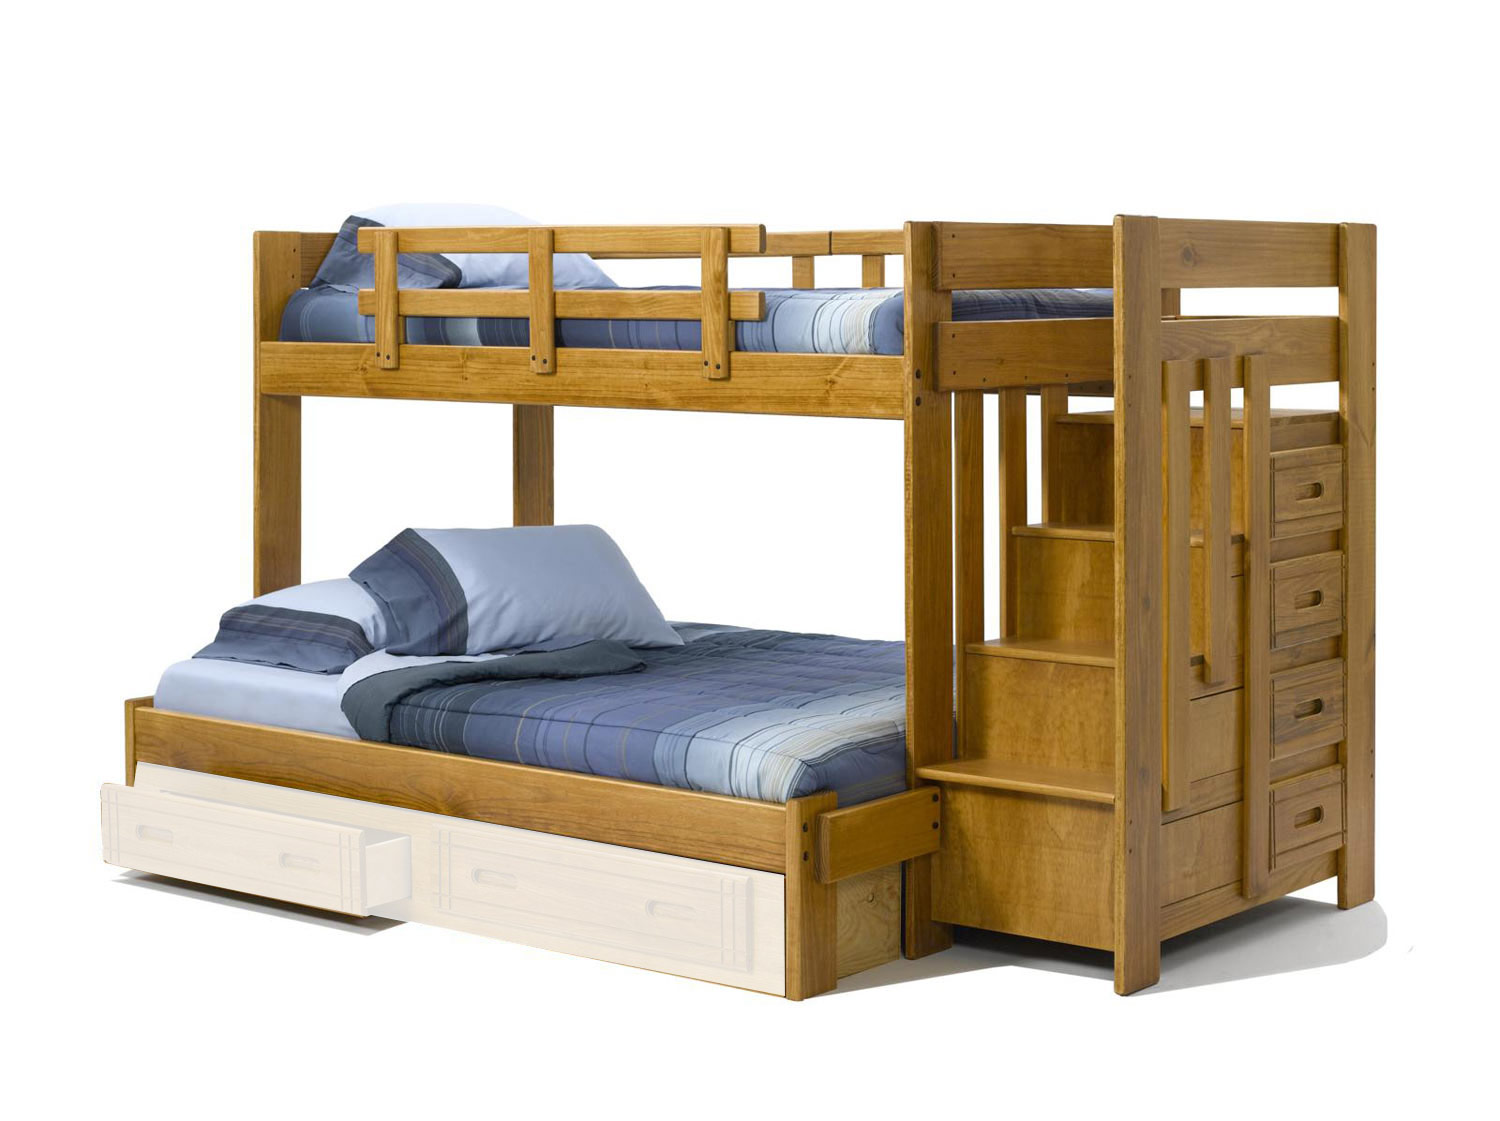 Chelsea Home 36154W Twin Over Full Bunk Bed with Stairway Chest - Honey